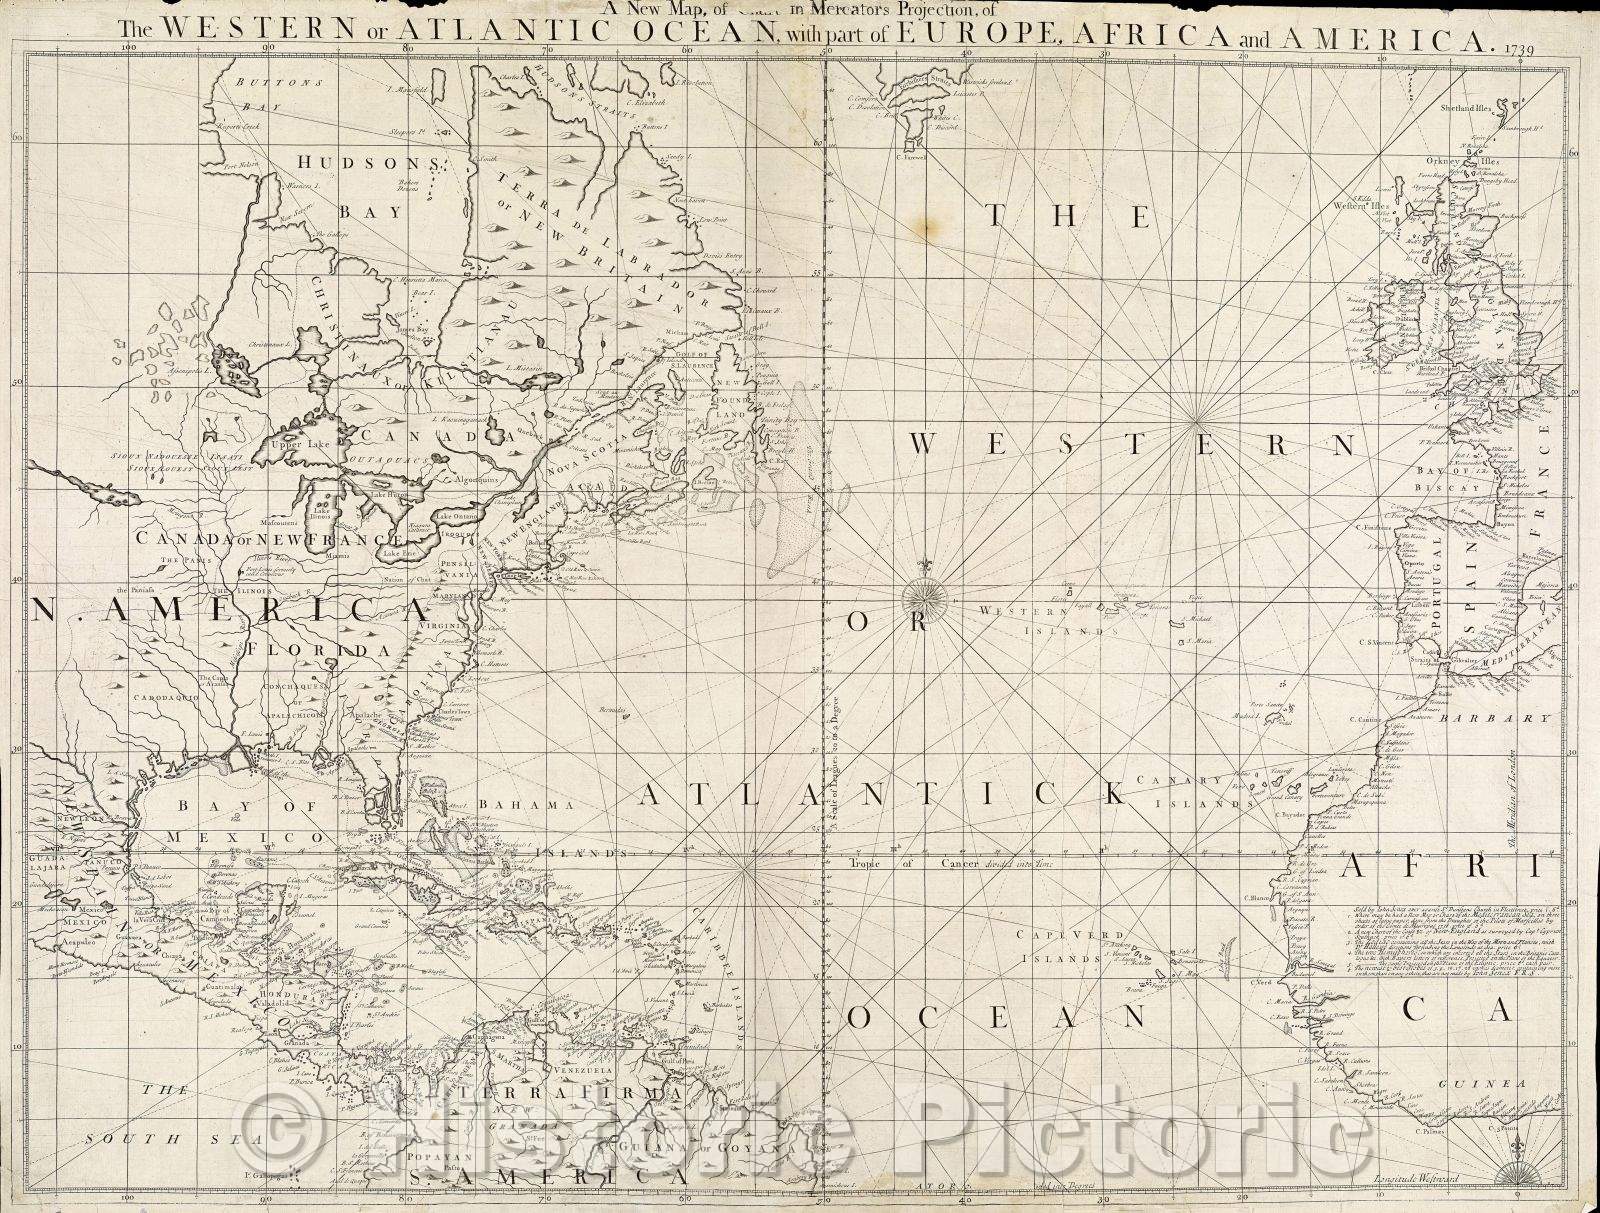 Historic Map : A New Map, or (illegible) in Mercators Projection, of the Western or Atlantic Ocean, with part of Europe, Africa and America 1739., 1739 , Vintage Wall Art